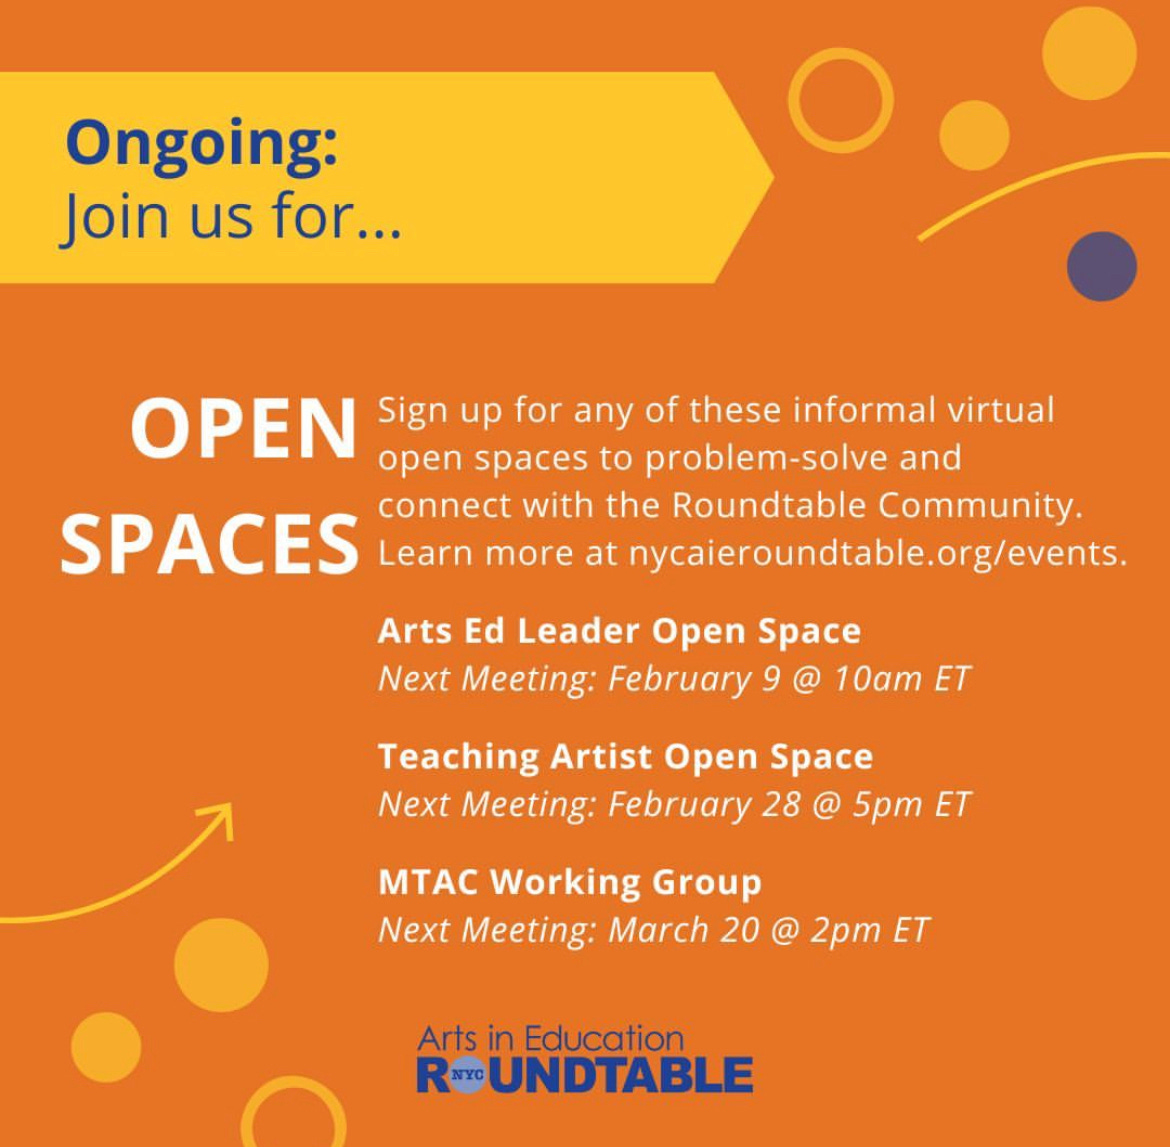 Orange background with different shapes and arrows. Text highlighting ongoing open spaces from the Arts in Education roundtable. Details on their website linked below.